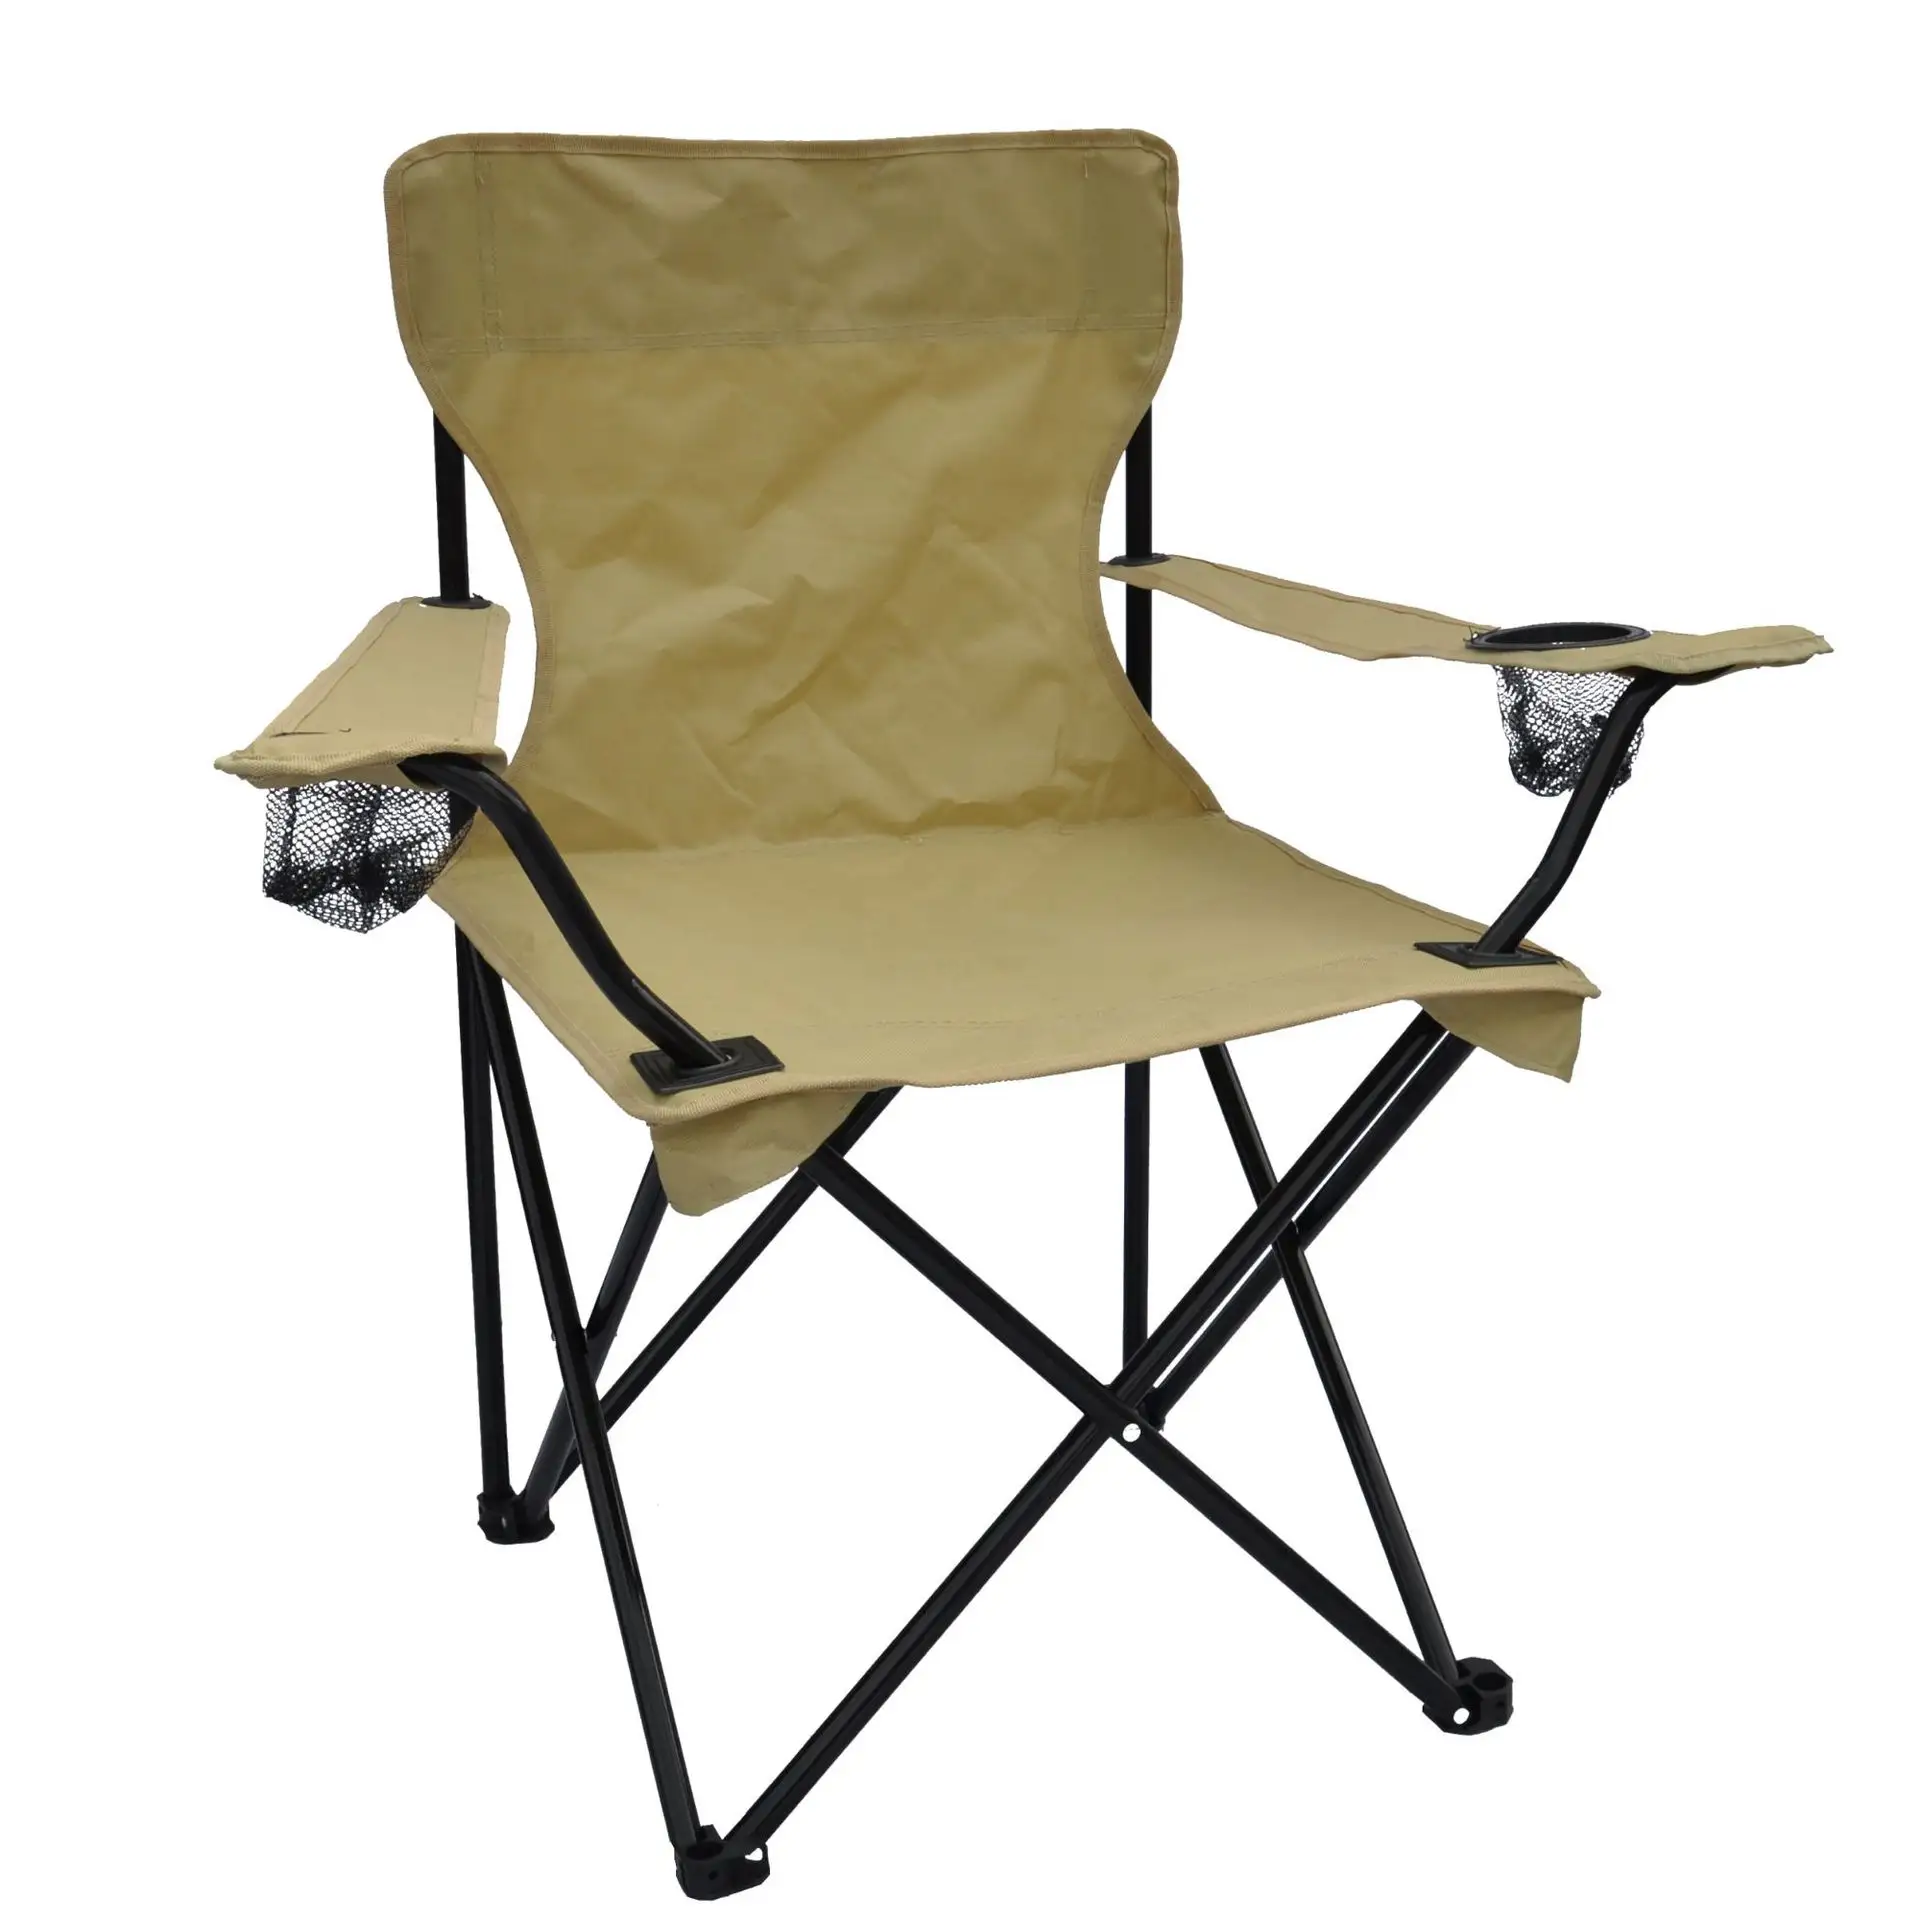 Heavy Duty Outdoor Portable Leisure Foldable Beach Fishing Folding Camping Chair